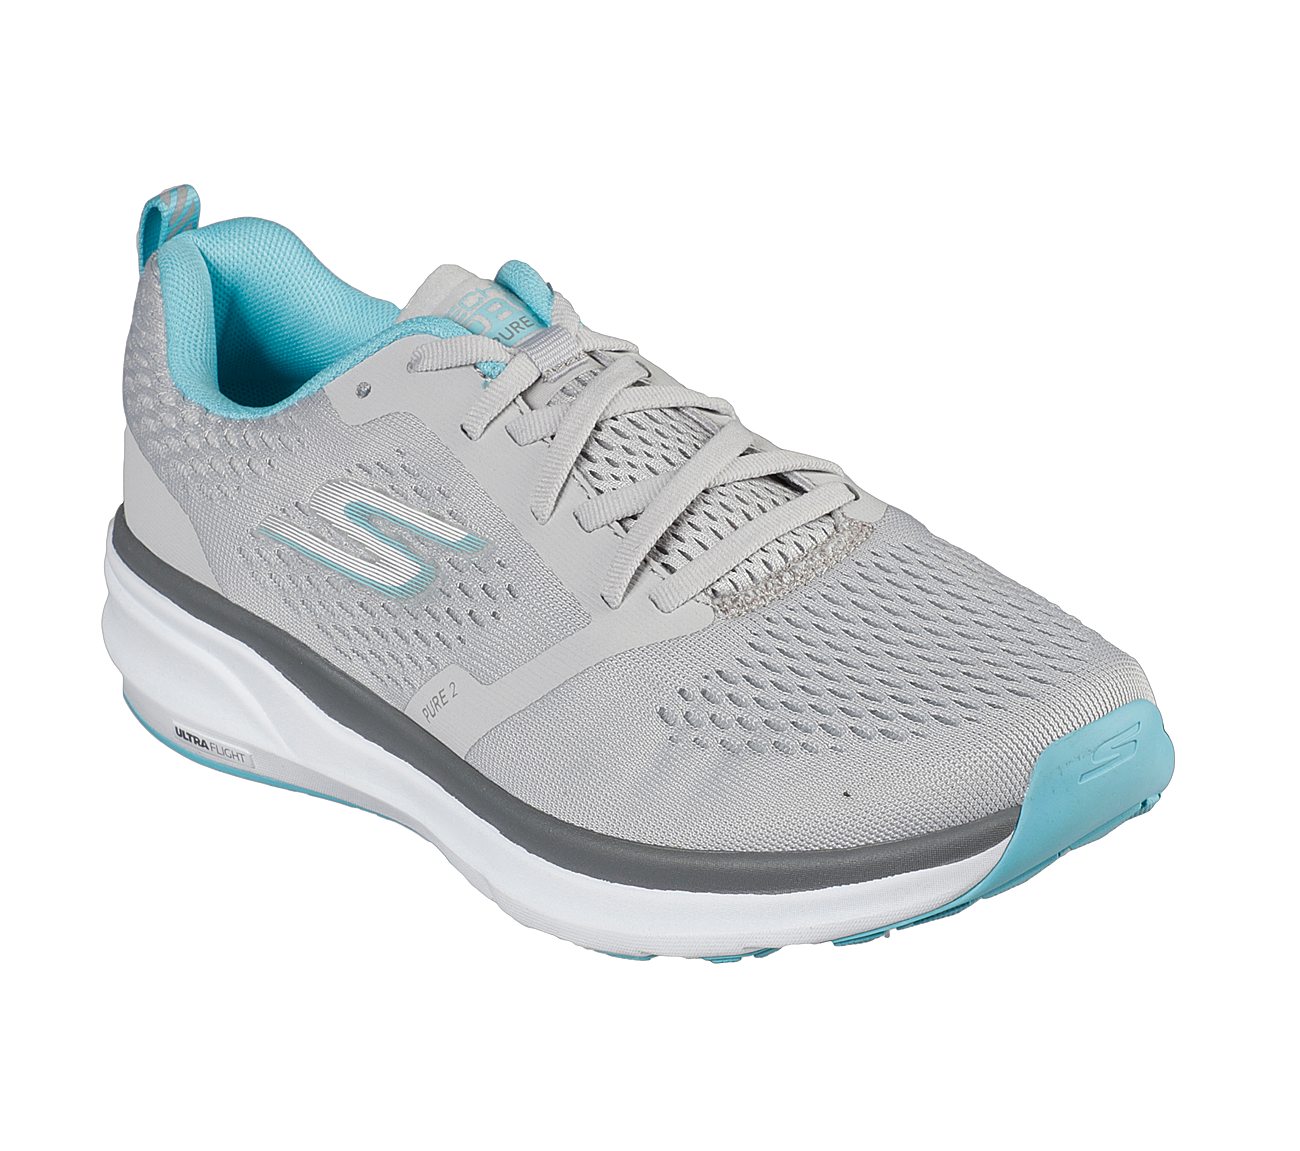 PURE 2, GREY/TURQUOISE Footwear Top View